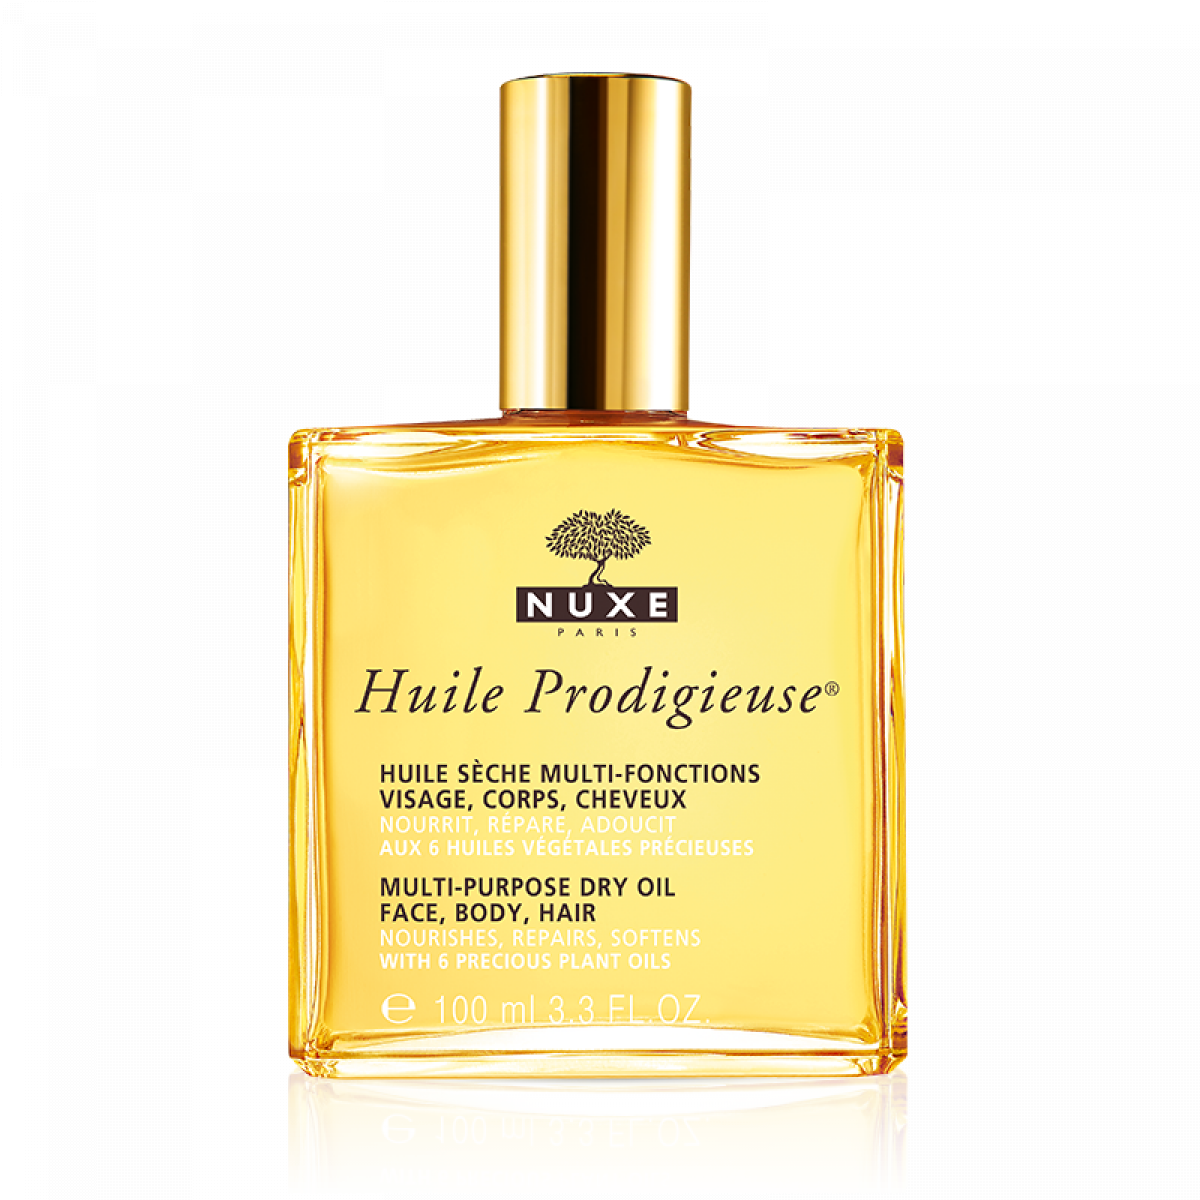 NUXE - Huile Prodigieuse Dry Oil - Face, Body & Hair Dry Oil - Repairs & Protects